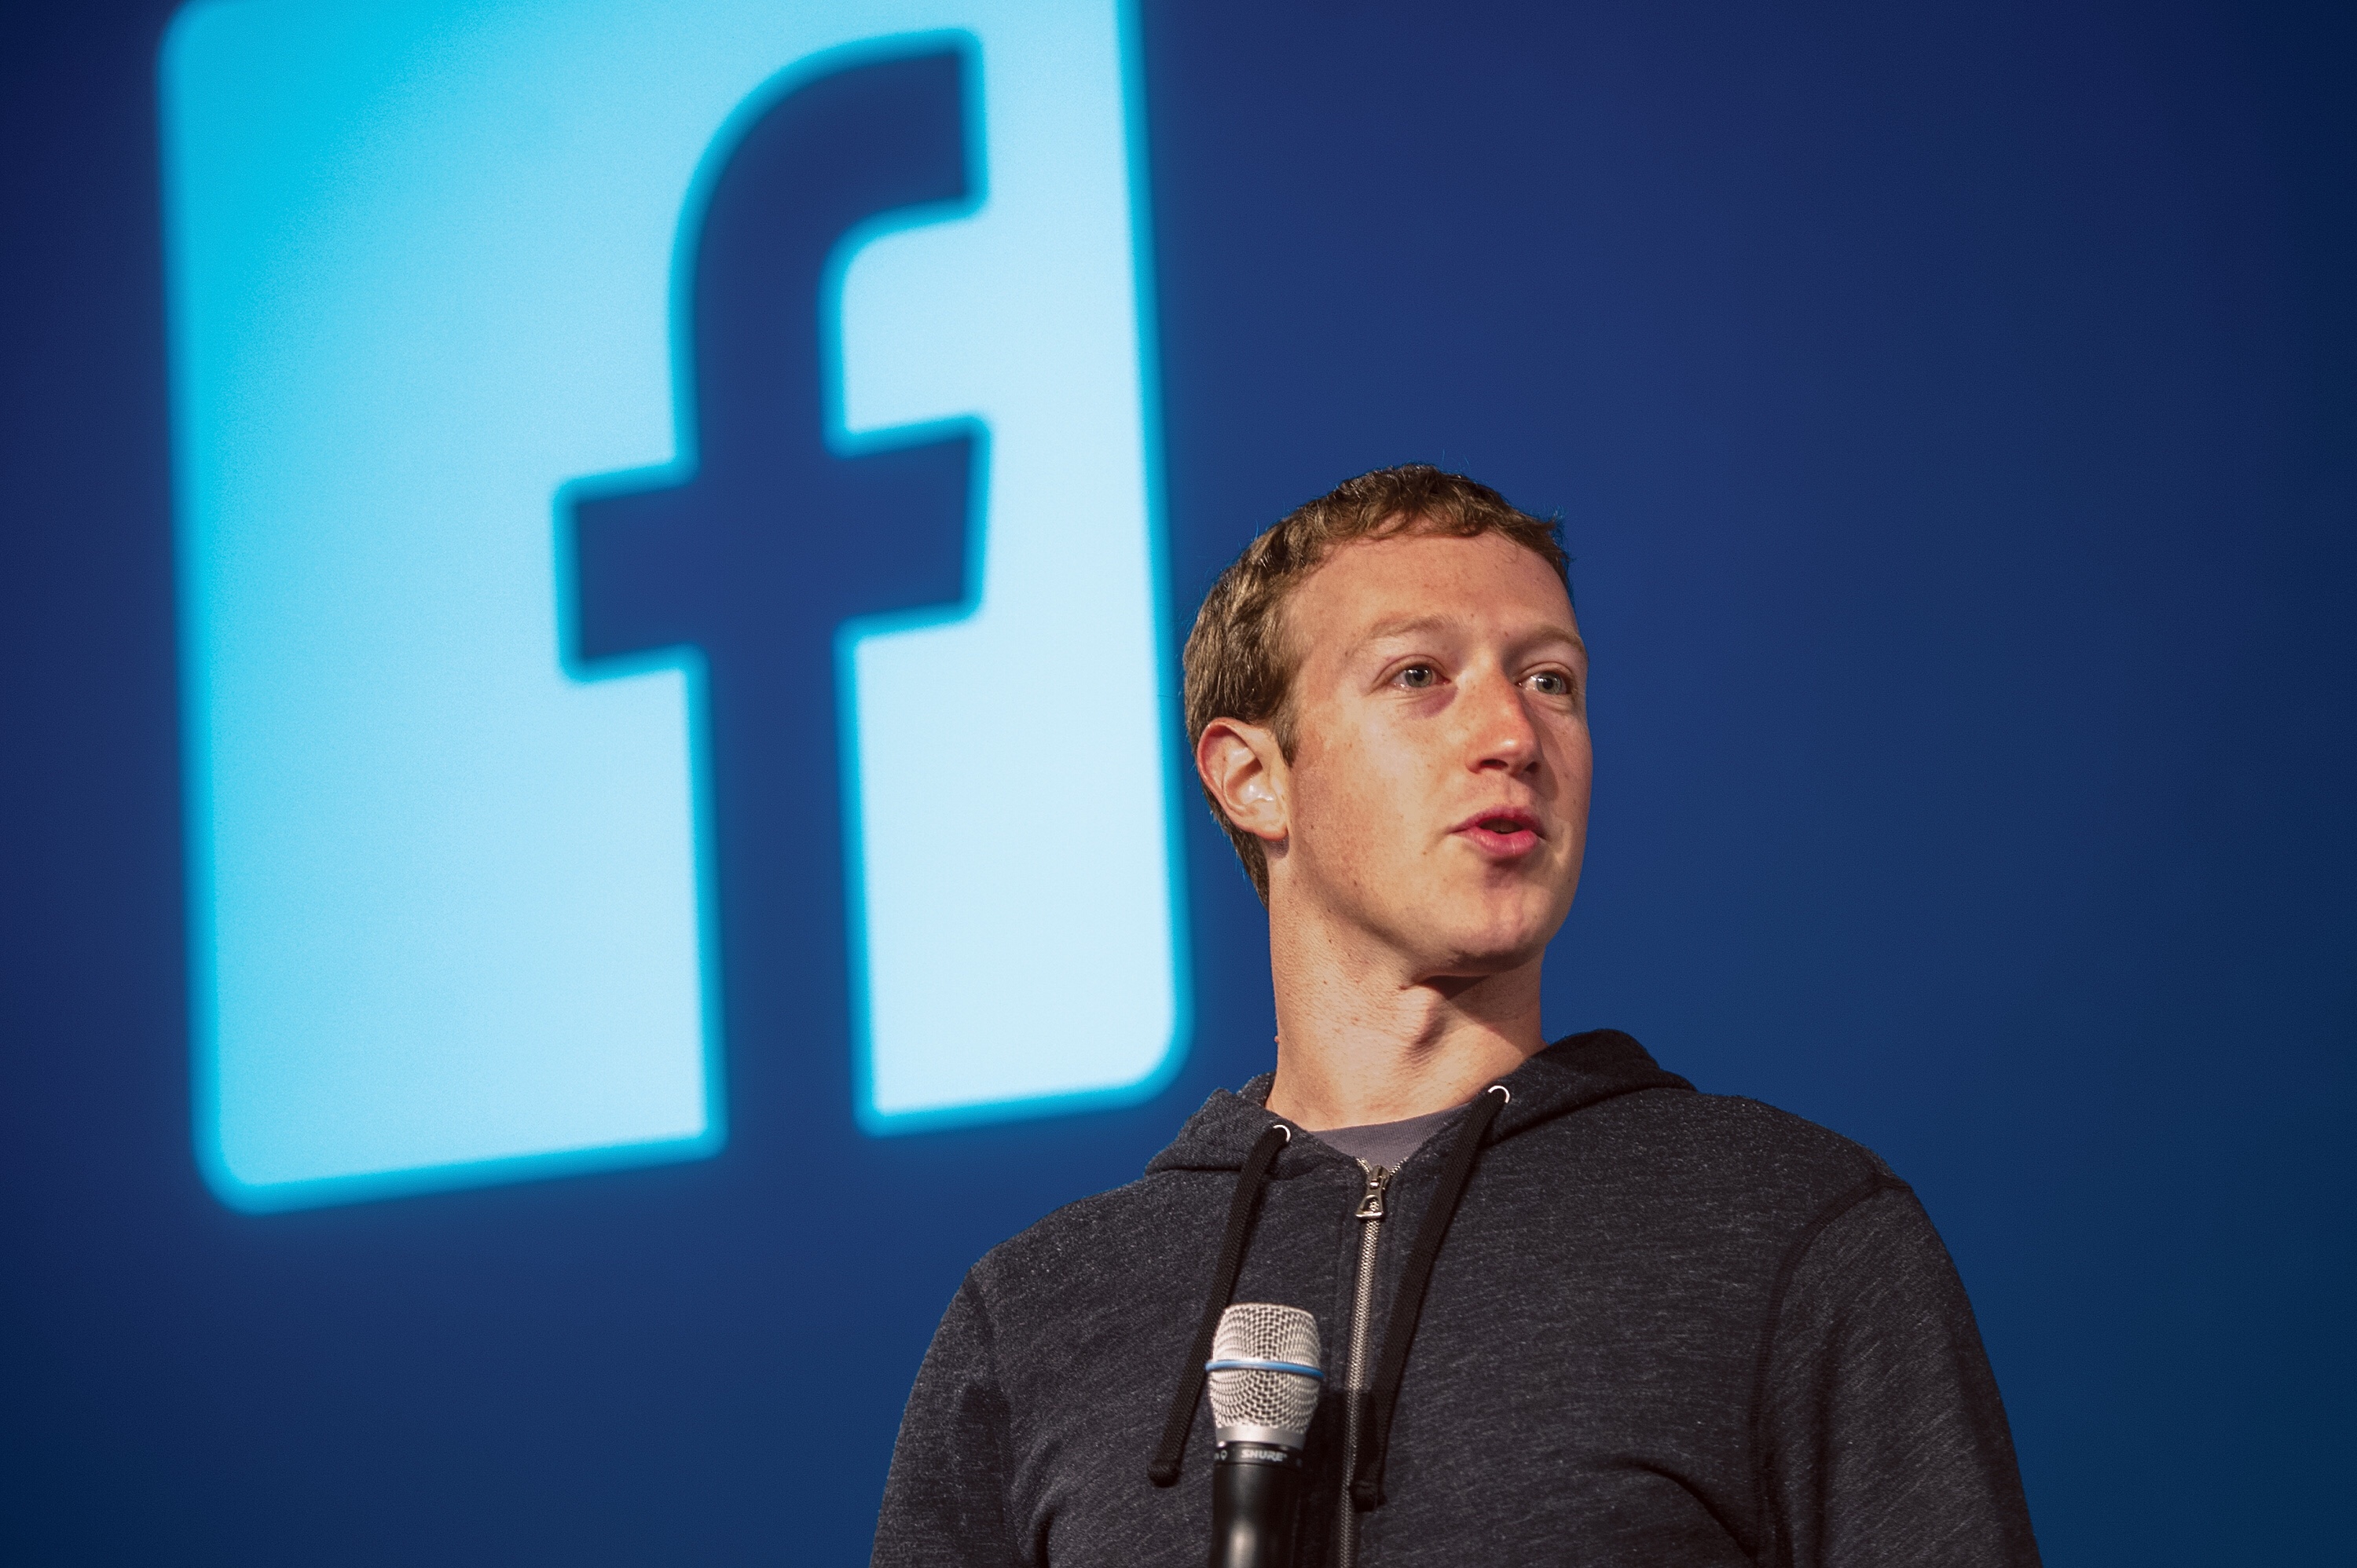 Facebook’s next news feed move: appropriately ranking ‘trusted’ sources